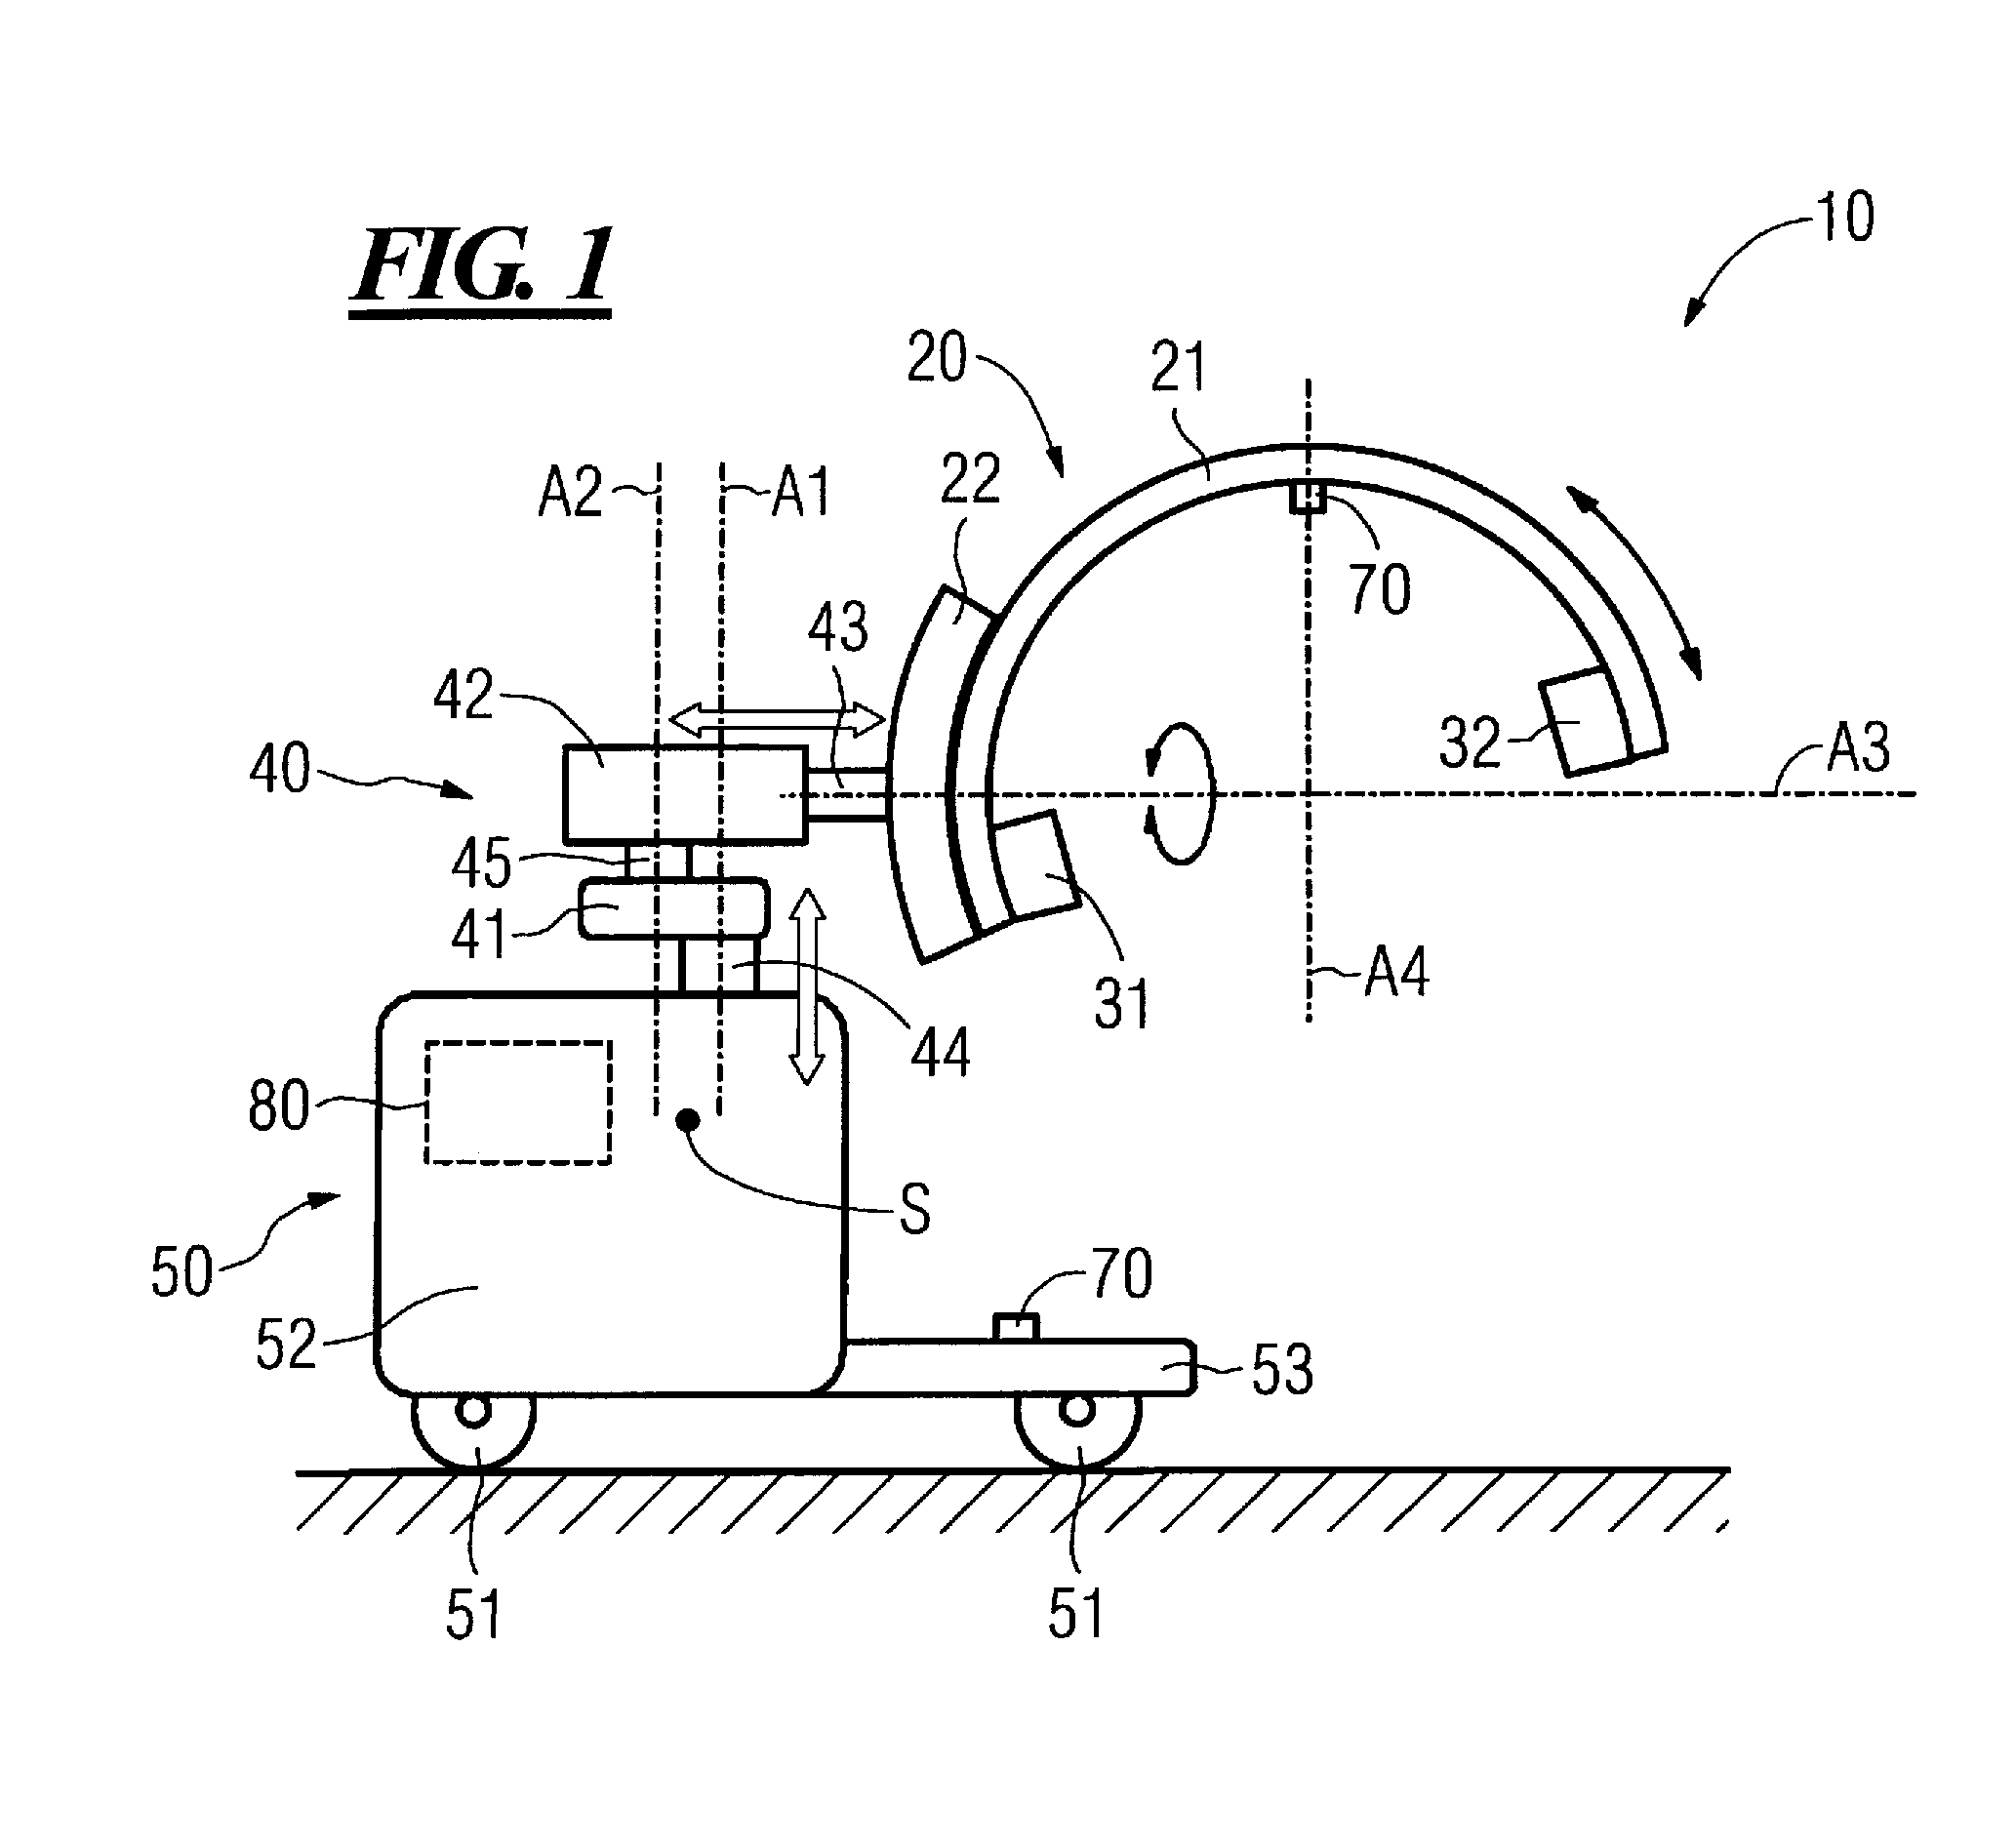 X-ray recording device with an X-ray detector and an X-ray emitter